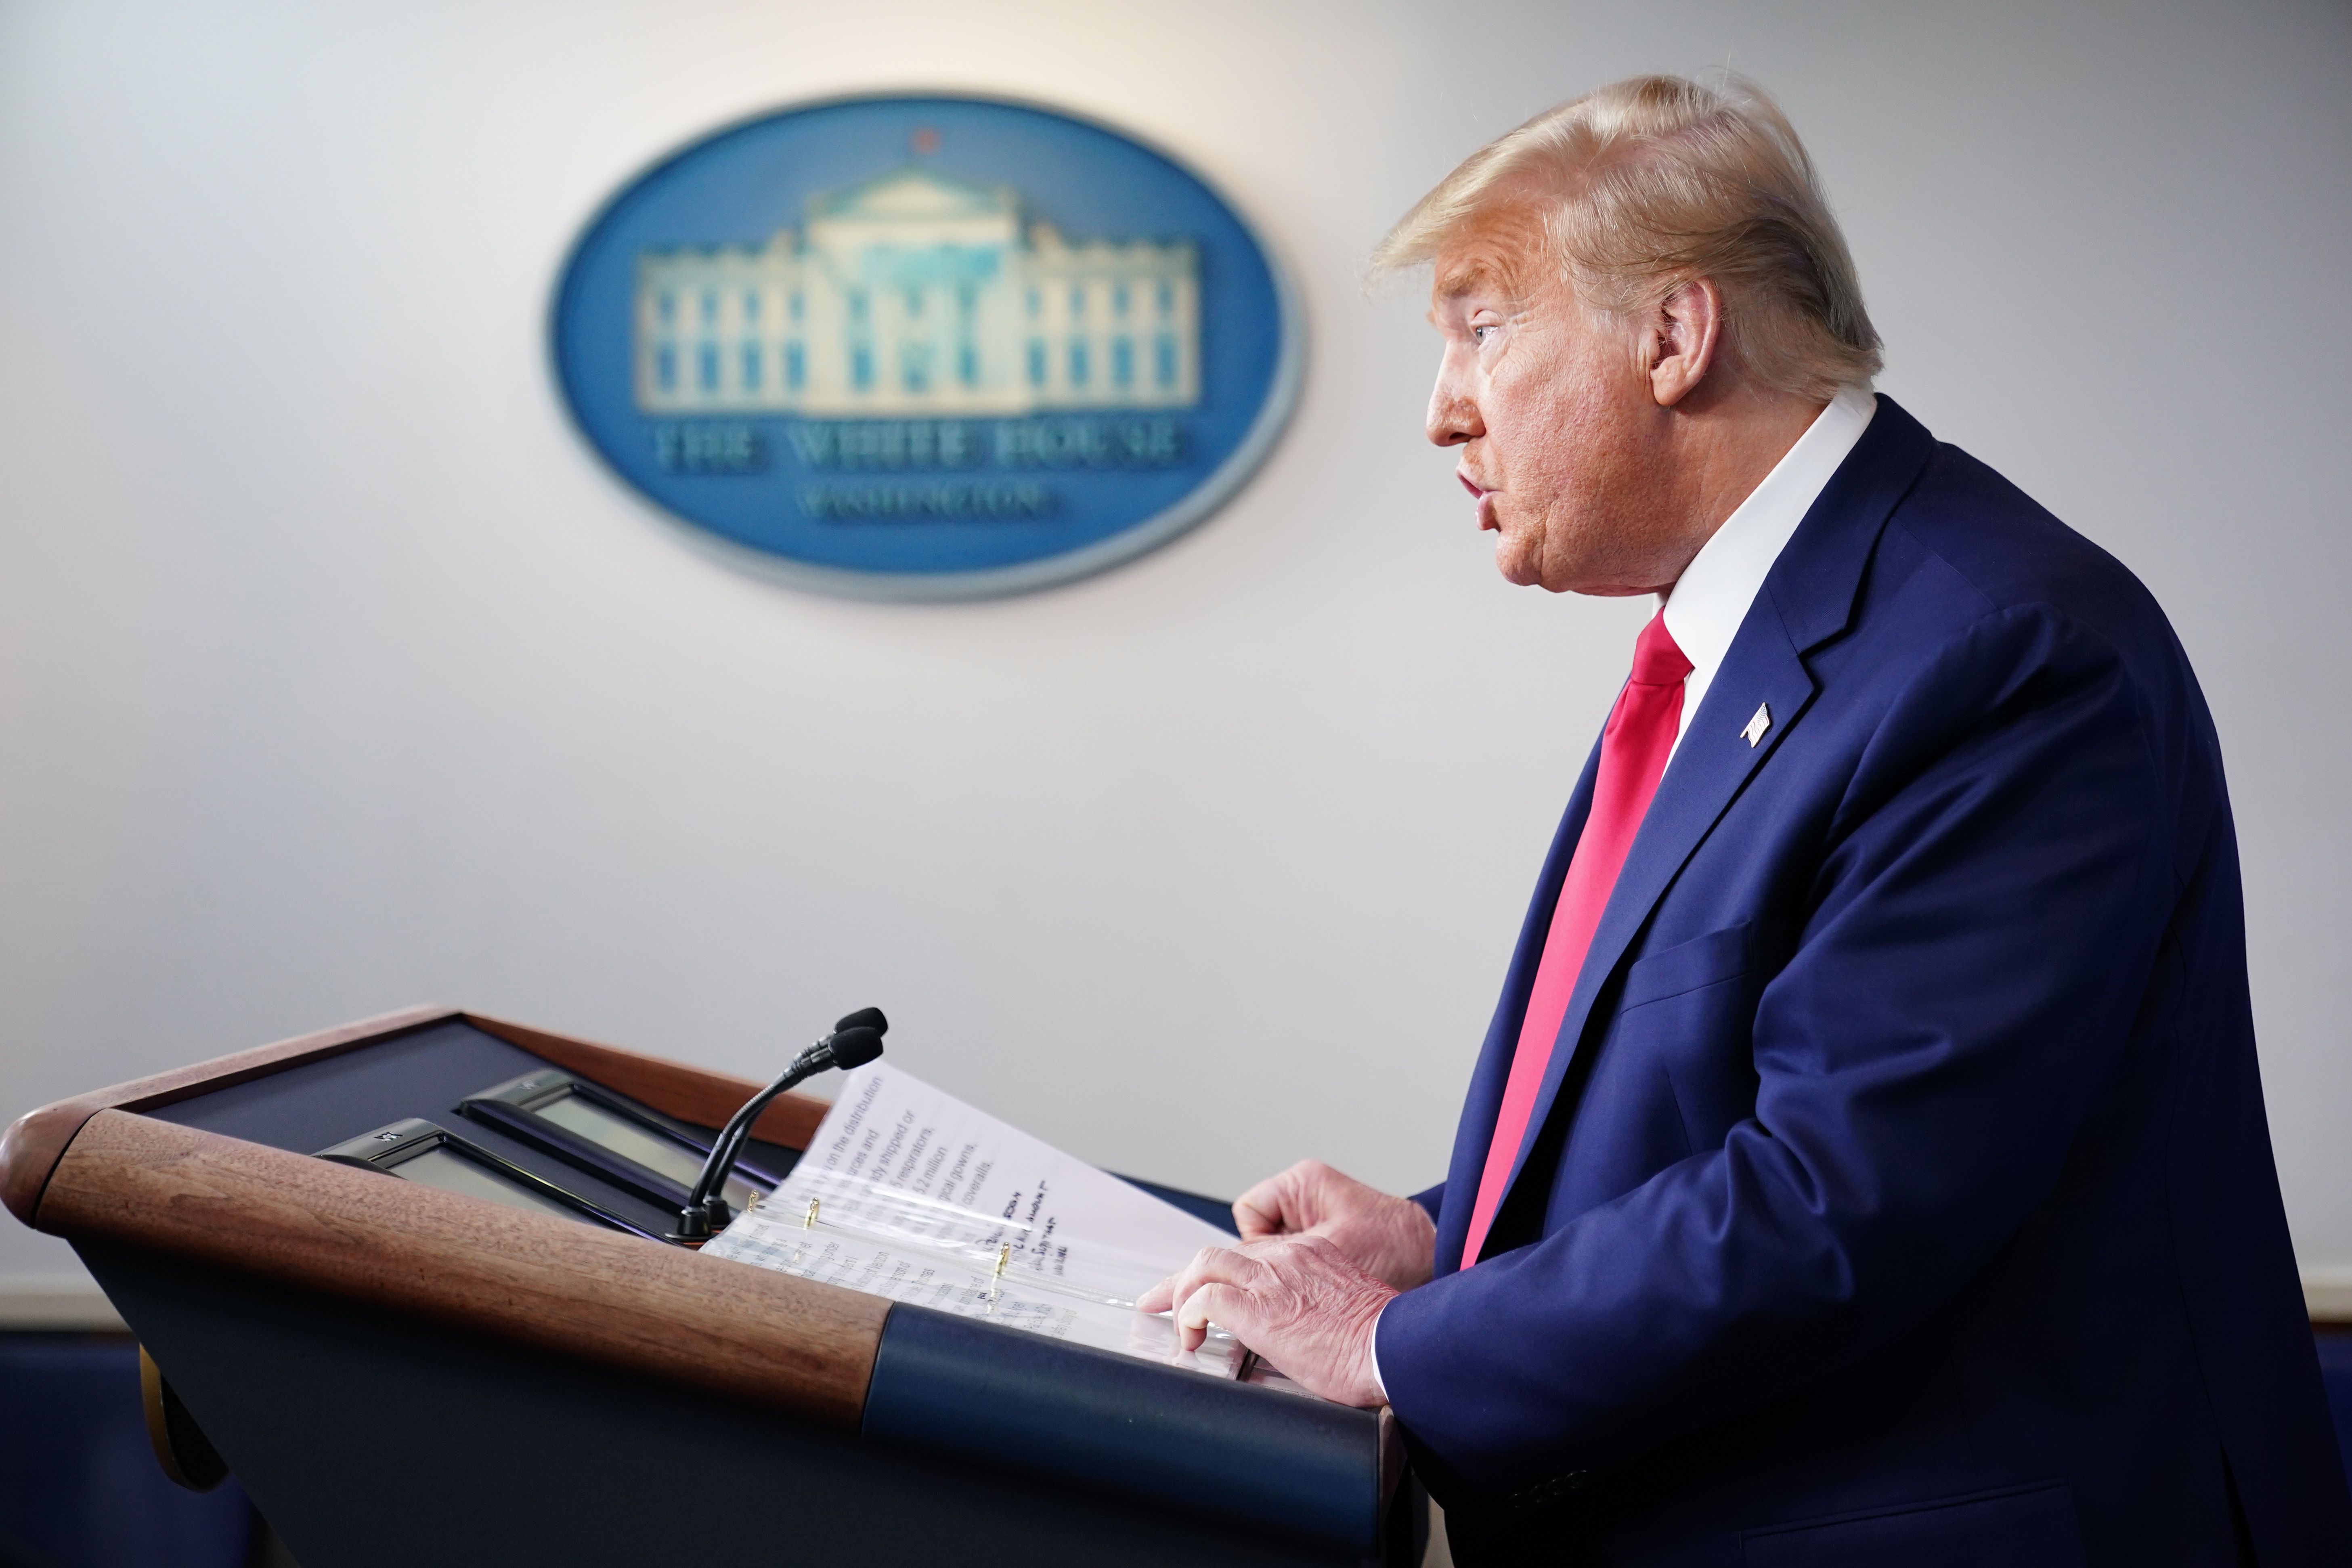 US President Donald Trump speaks during the daily briefing on the novel coronavirus, COVID-19, in the Brady Briefing Room at the White House on March 31, 2020, in Washington, DC. (Photo by MANDEL NGAN/AFP via Getty Images)